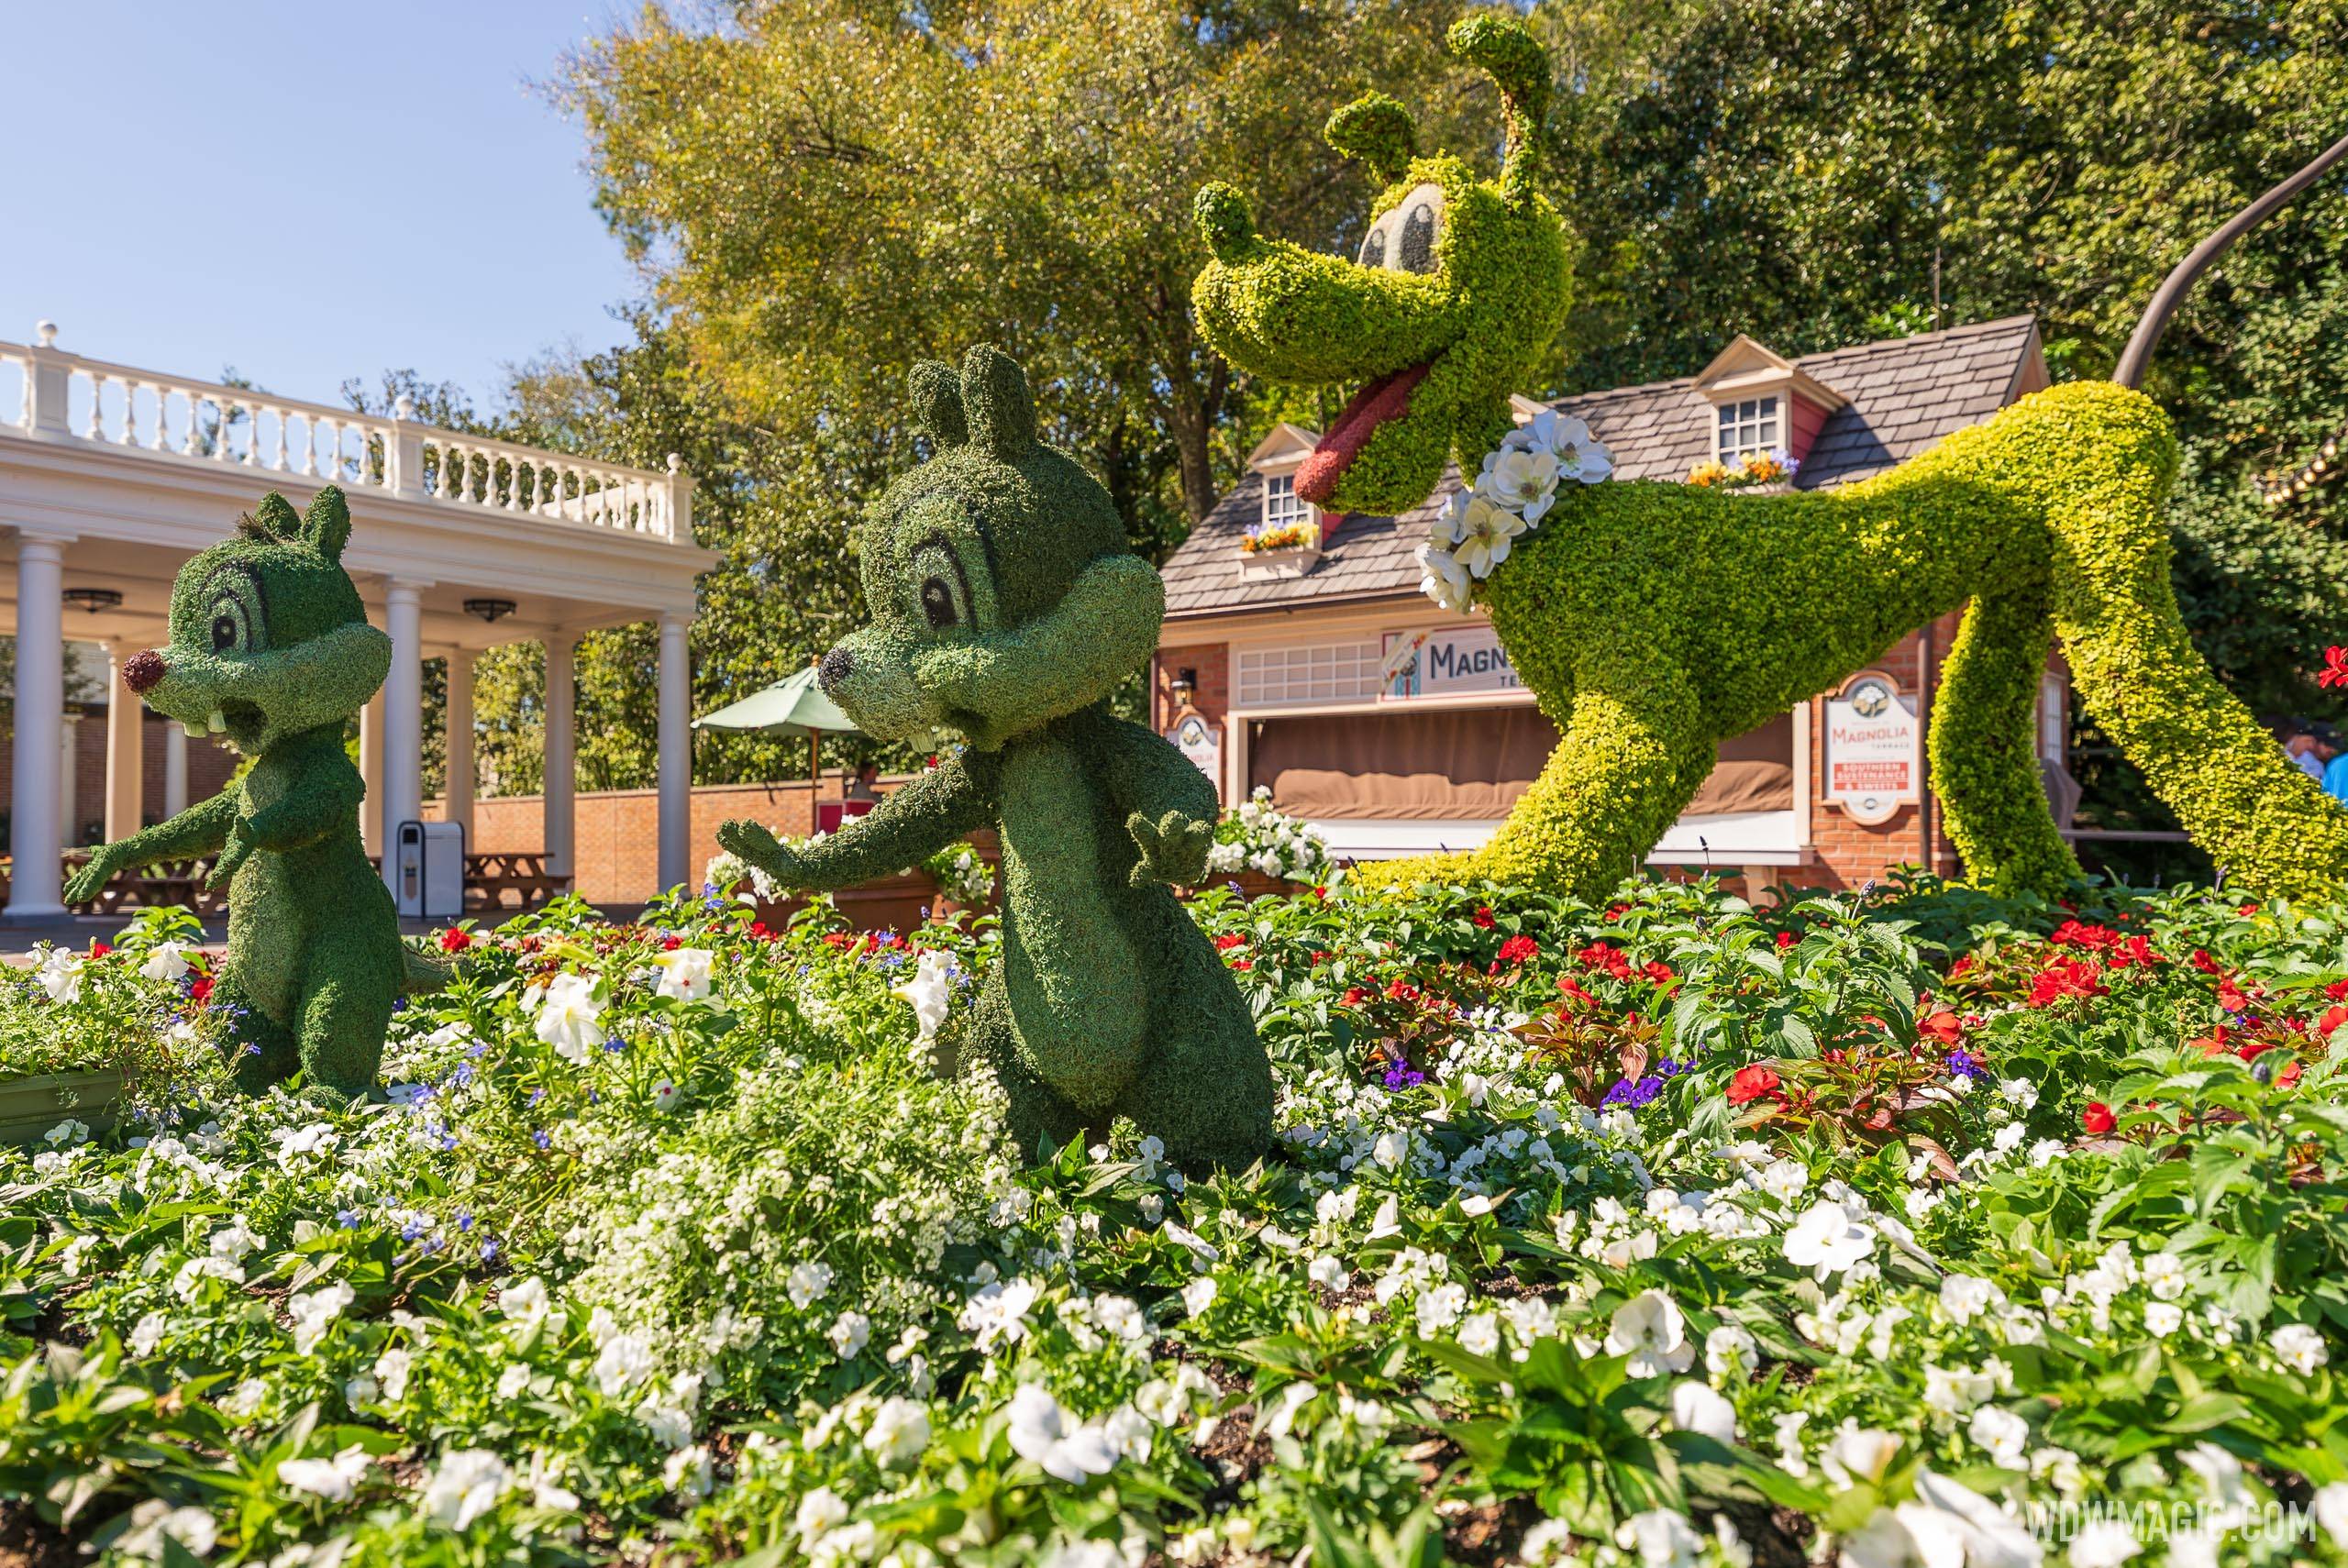 Pluto and Chip ‘n’ Dale – The American Adventure Pavilion